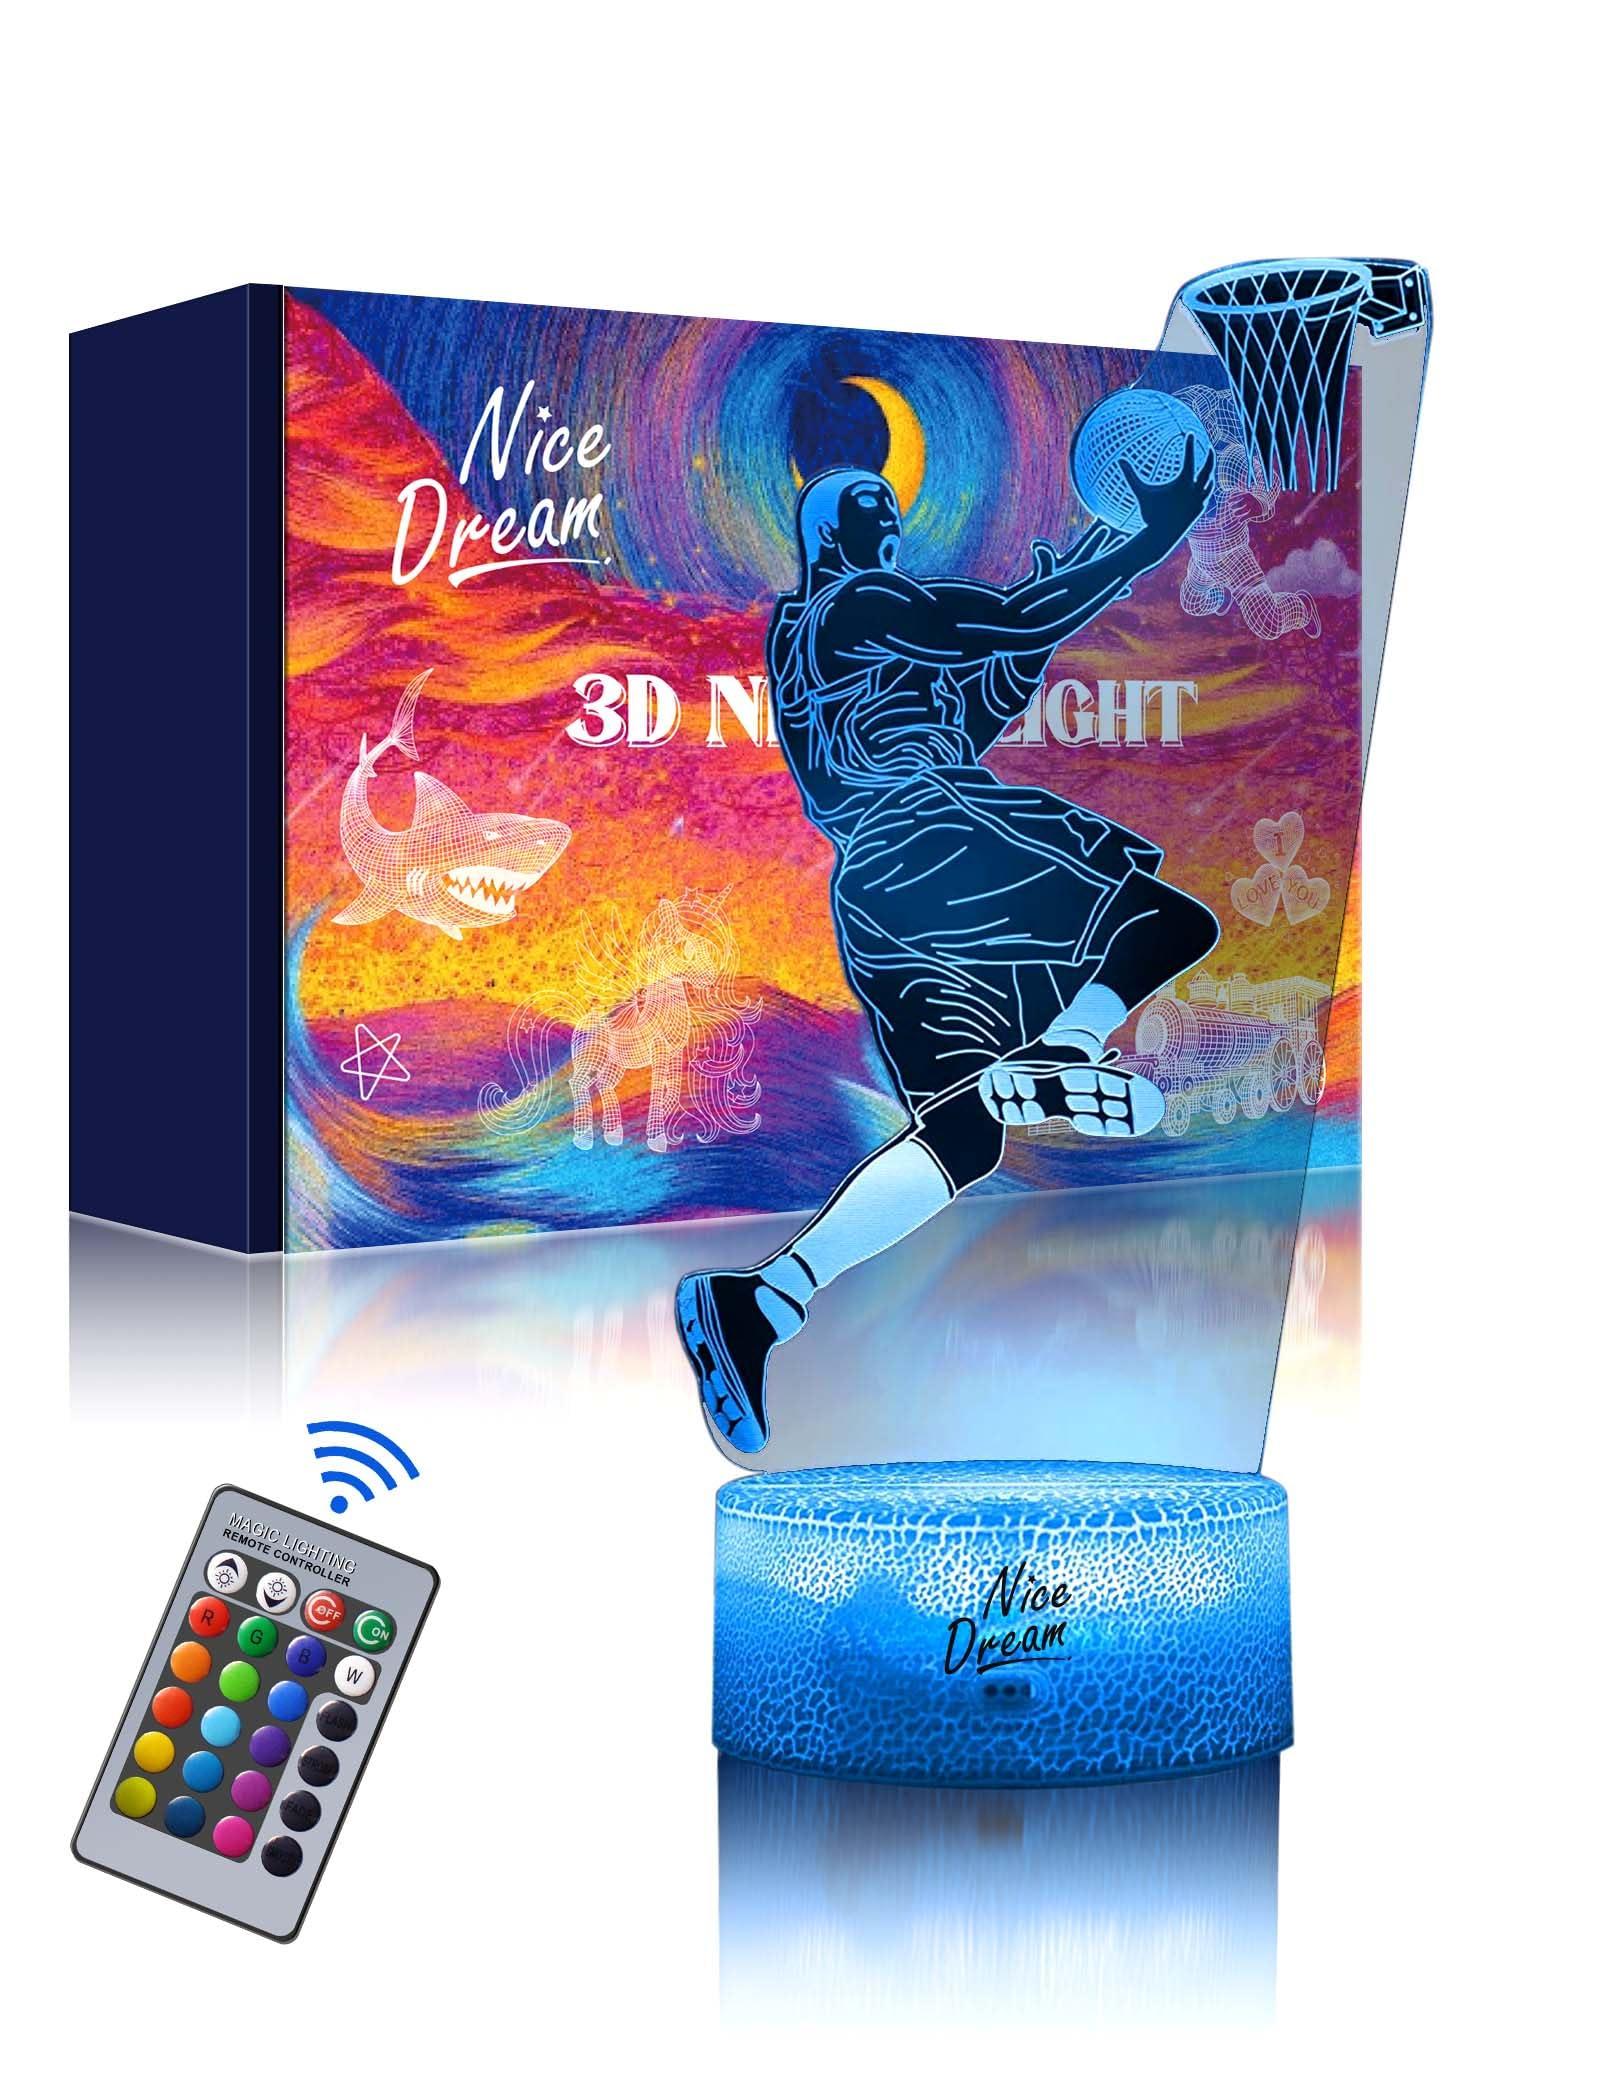 Nice Dream Basketball Player Night Light for Kids, 3D Illusion Night Lamp, 16 Colors Changing with Remote Control, Room Decor, Gifts for Children Boys Girls 0